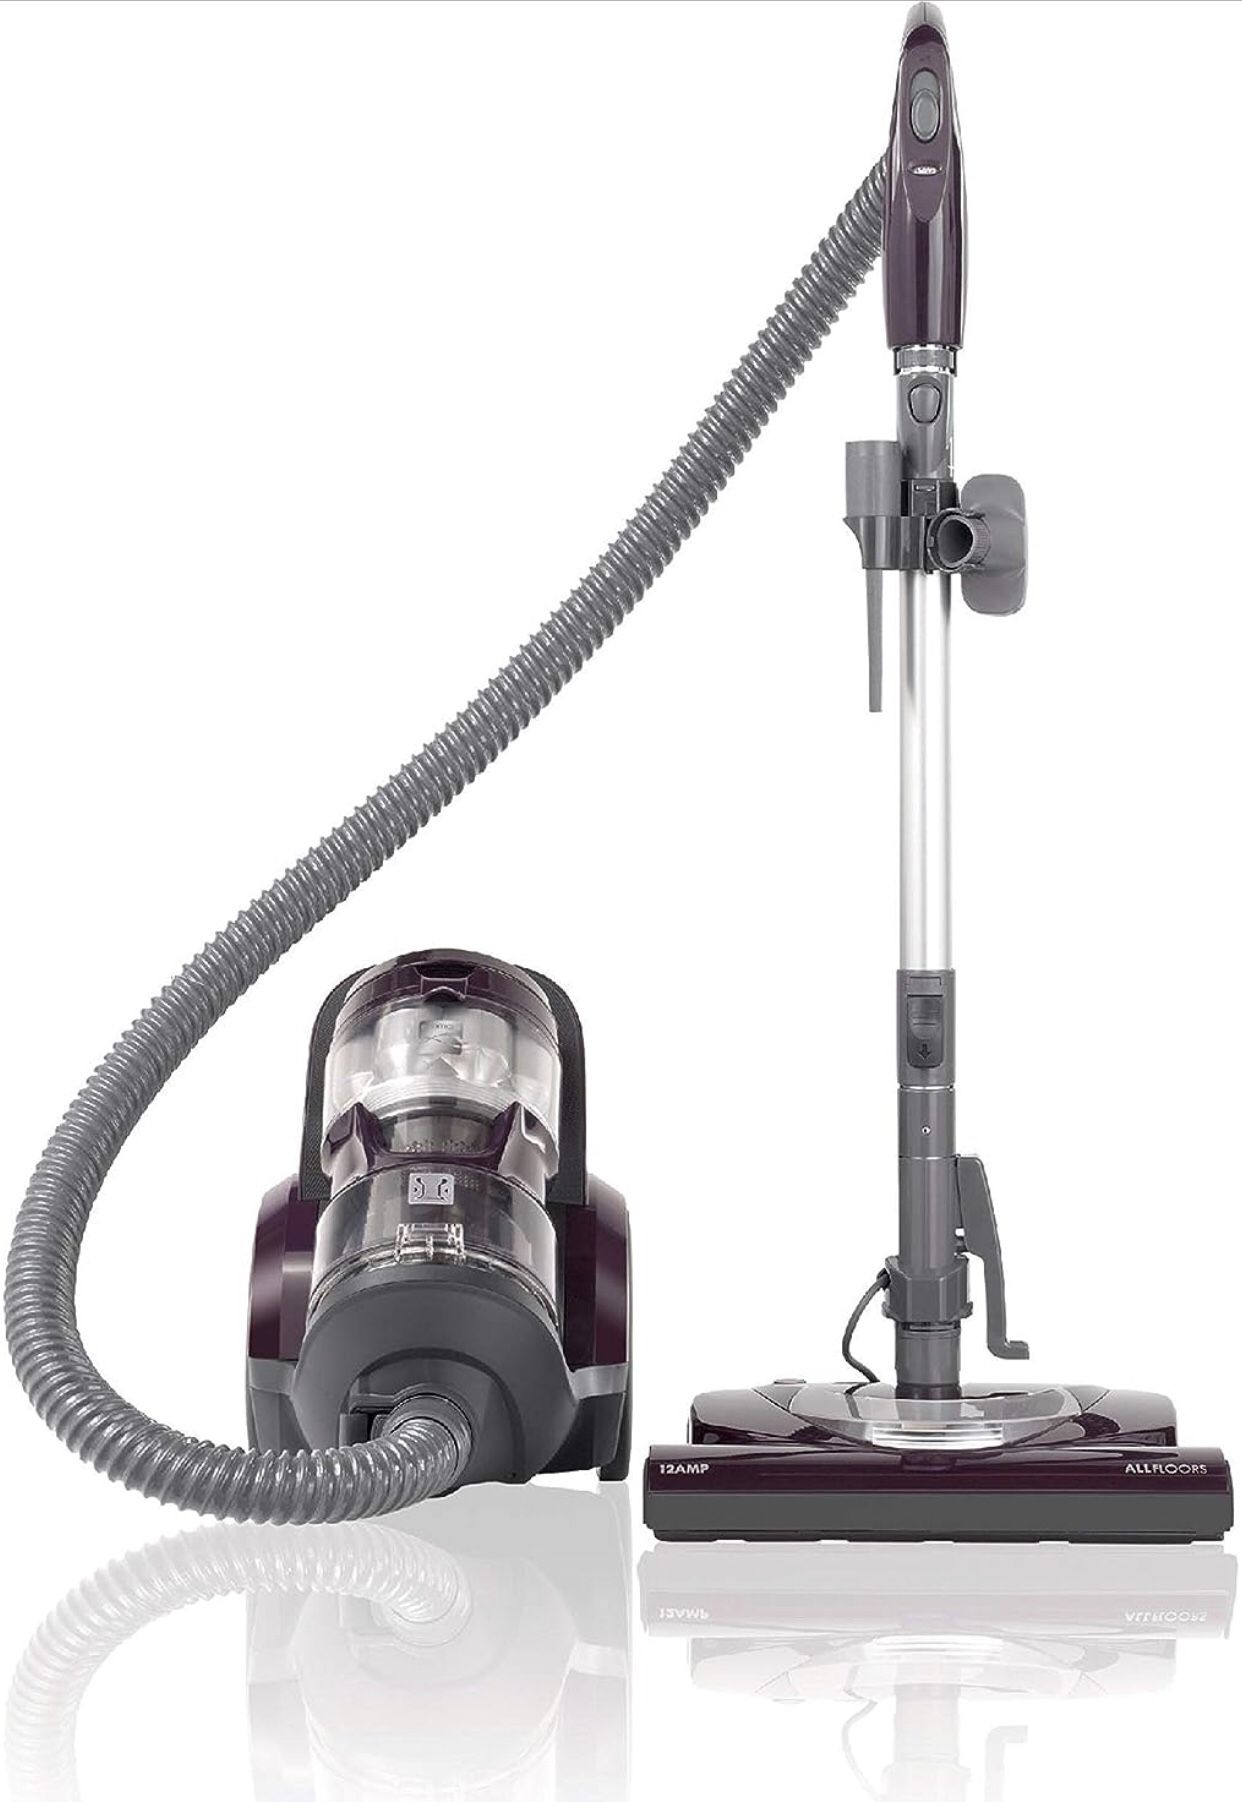 Kenmore Friendly Lightweight Bagless Compact Canister Vacuum, HEPA, Extended Telescoping Wand, Retractable Cord and 2 Cleaning Tools, Pet PowerMate + 